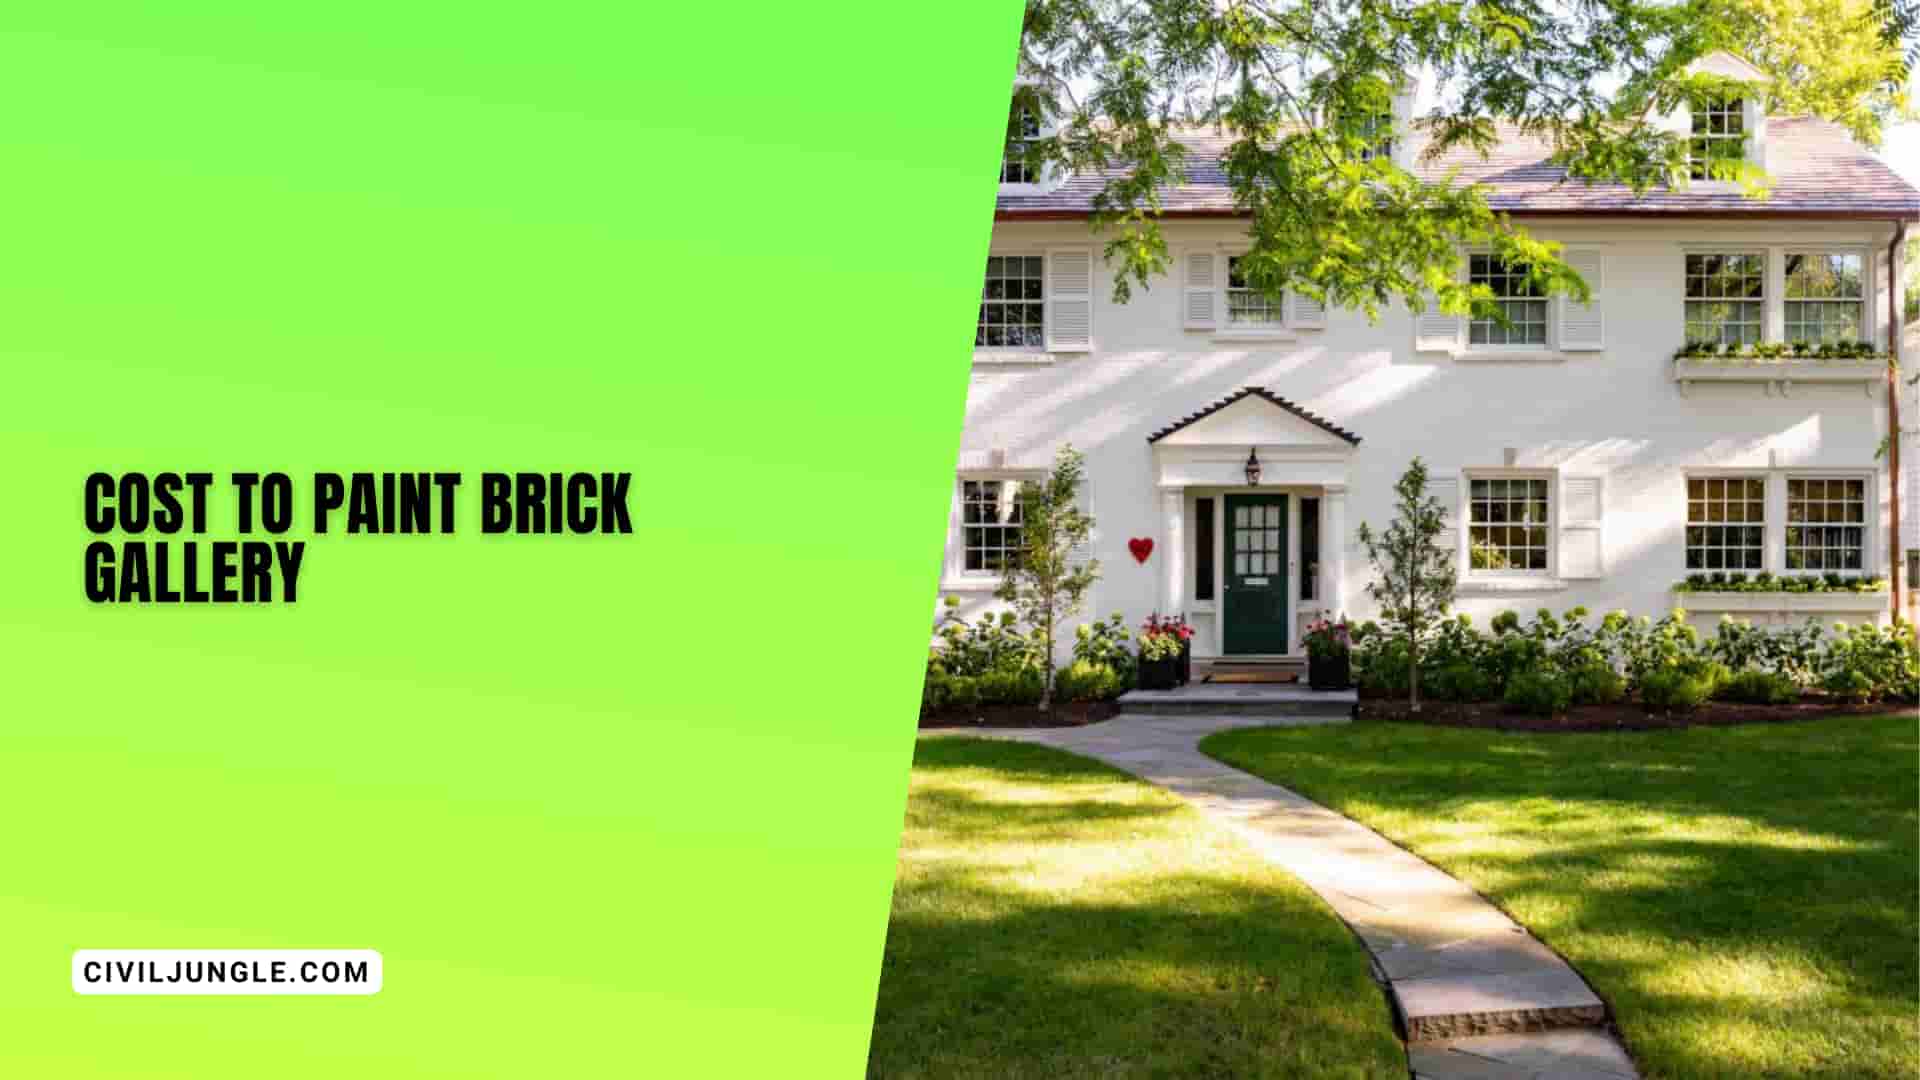 Cost to Paint Brick Gallery